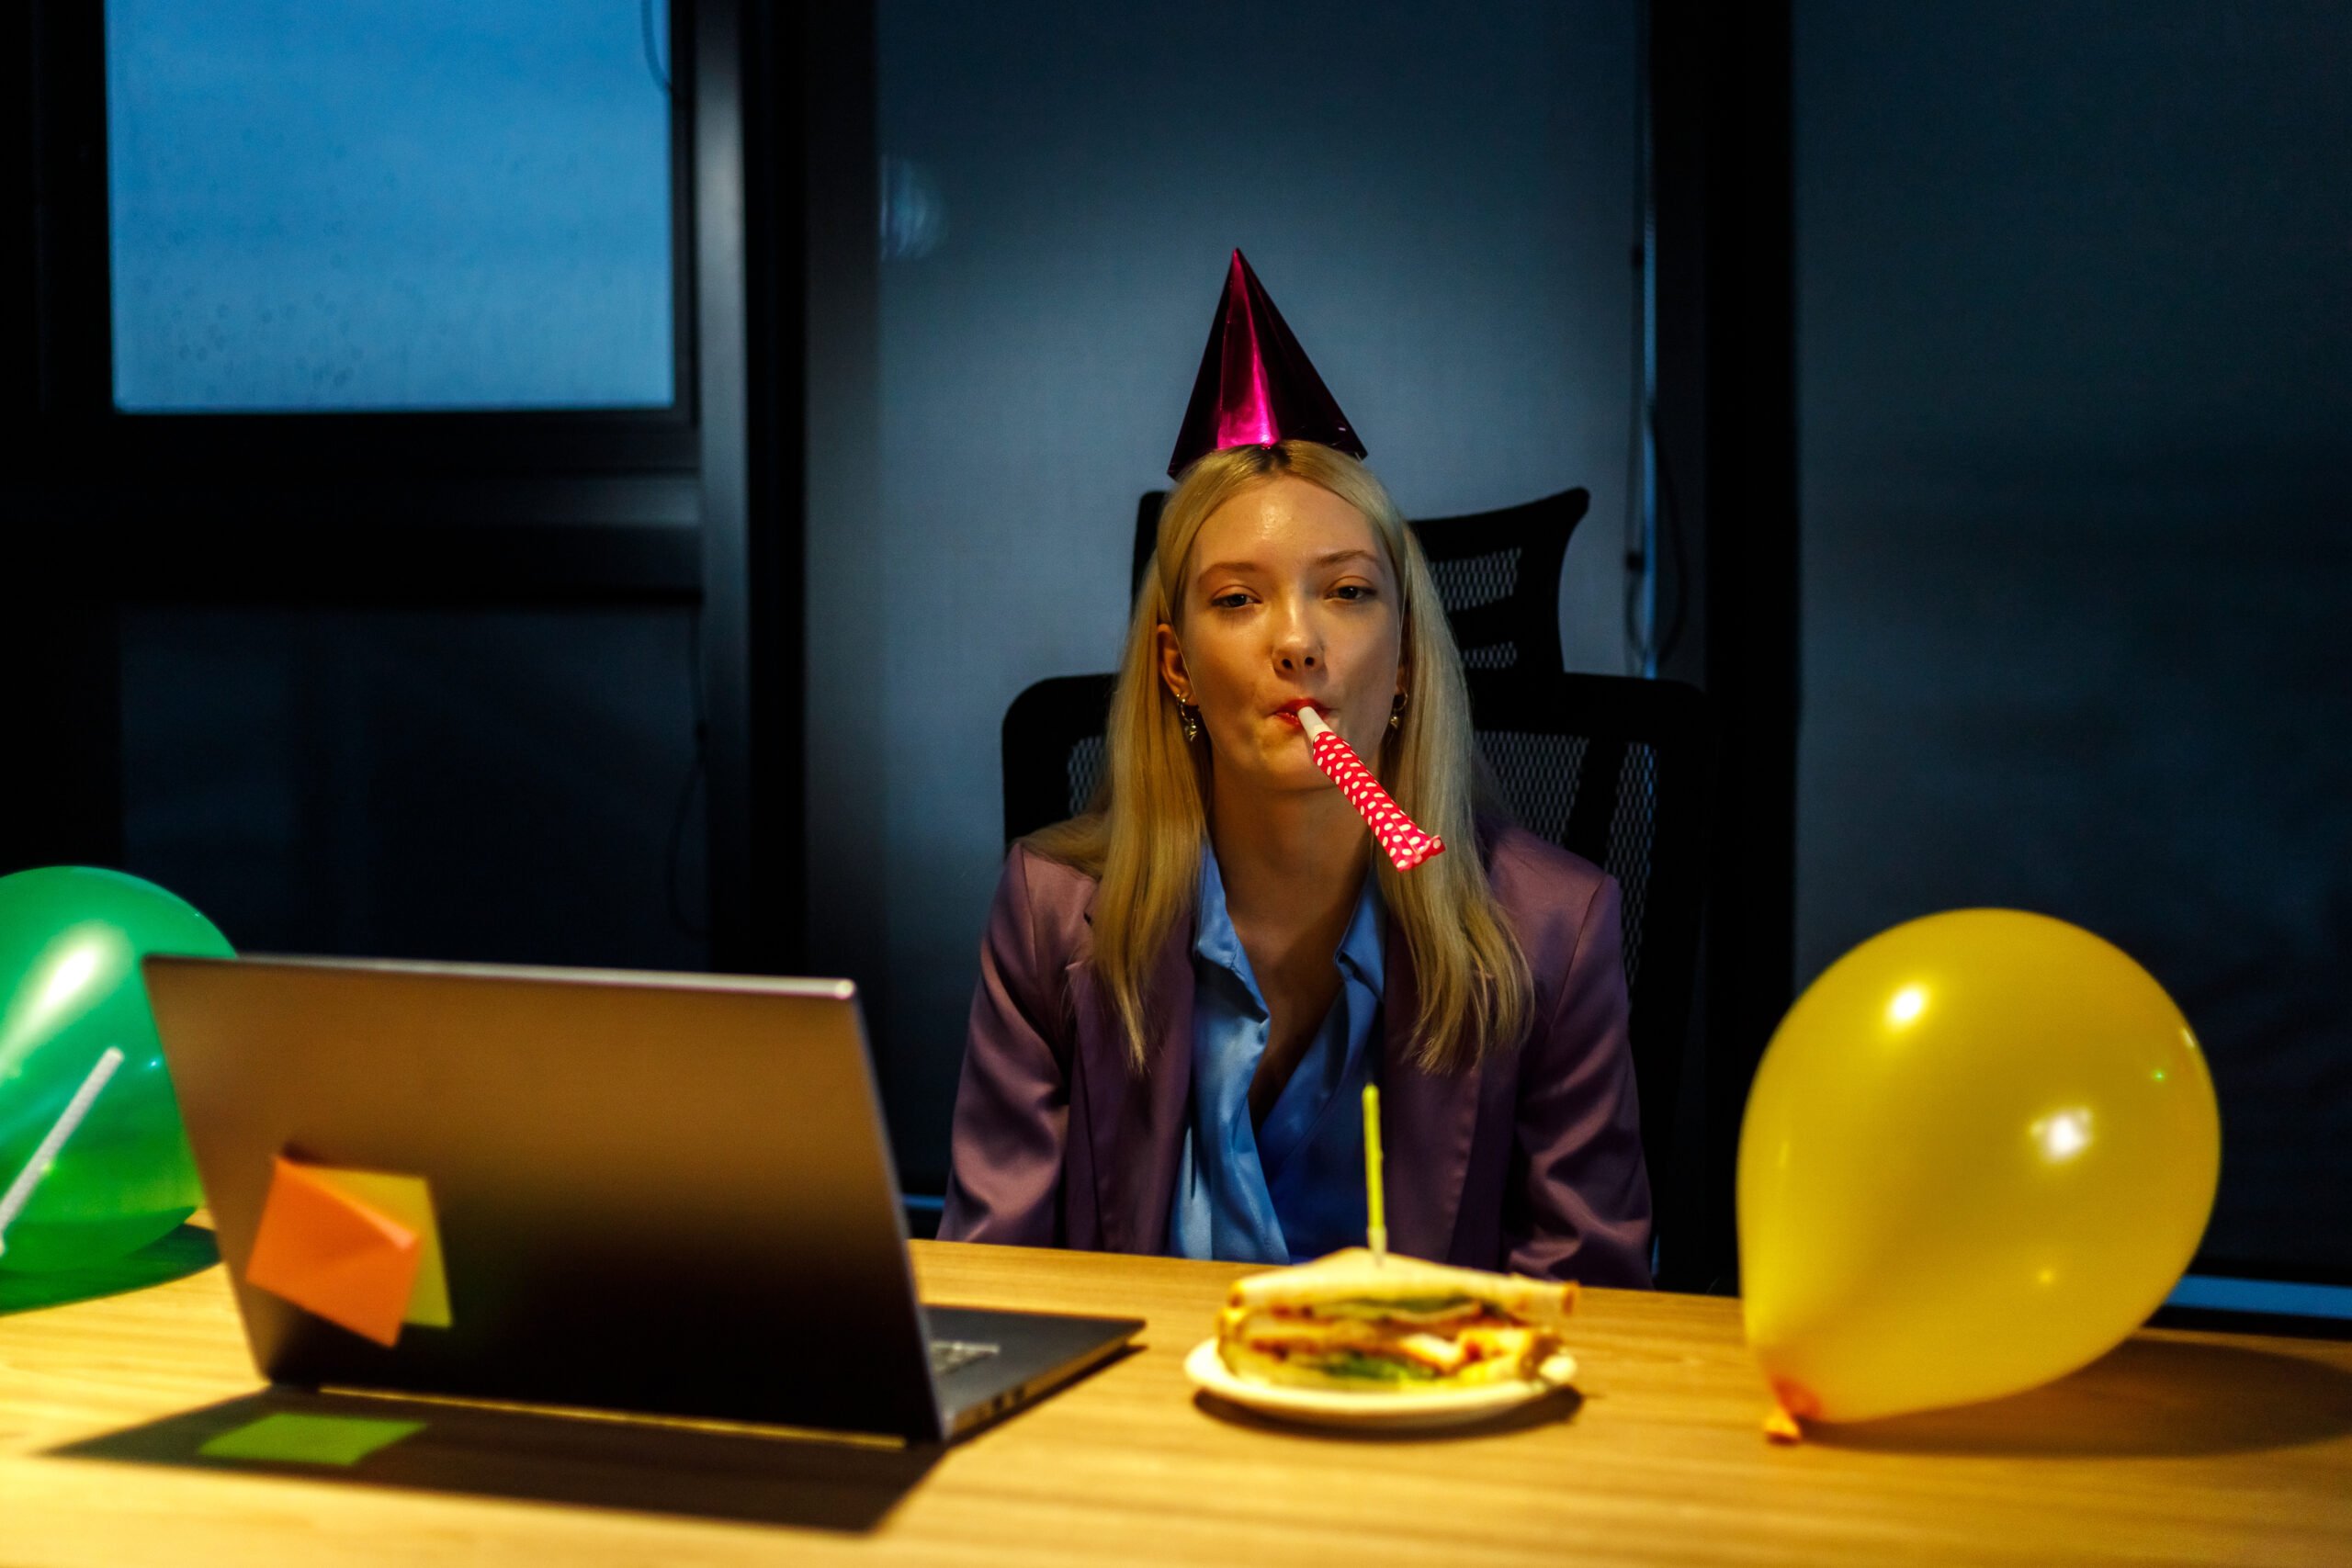 Woman on birthday sitting alone in front of computer